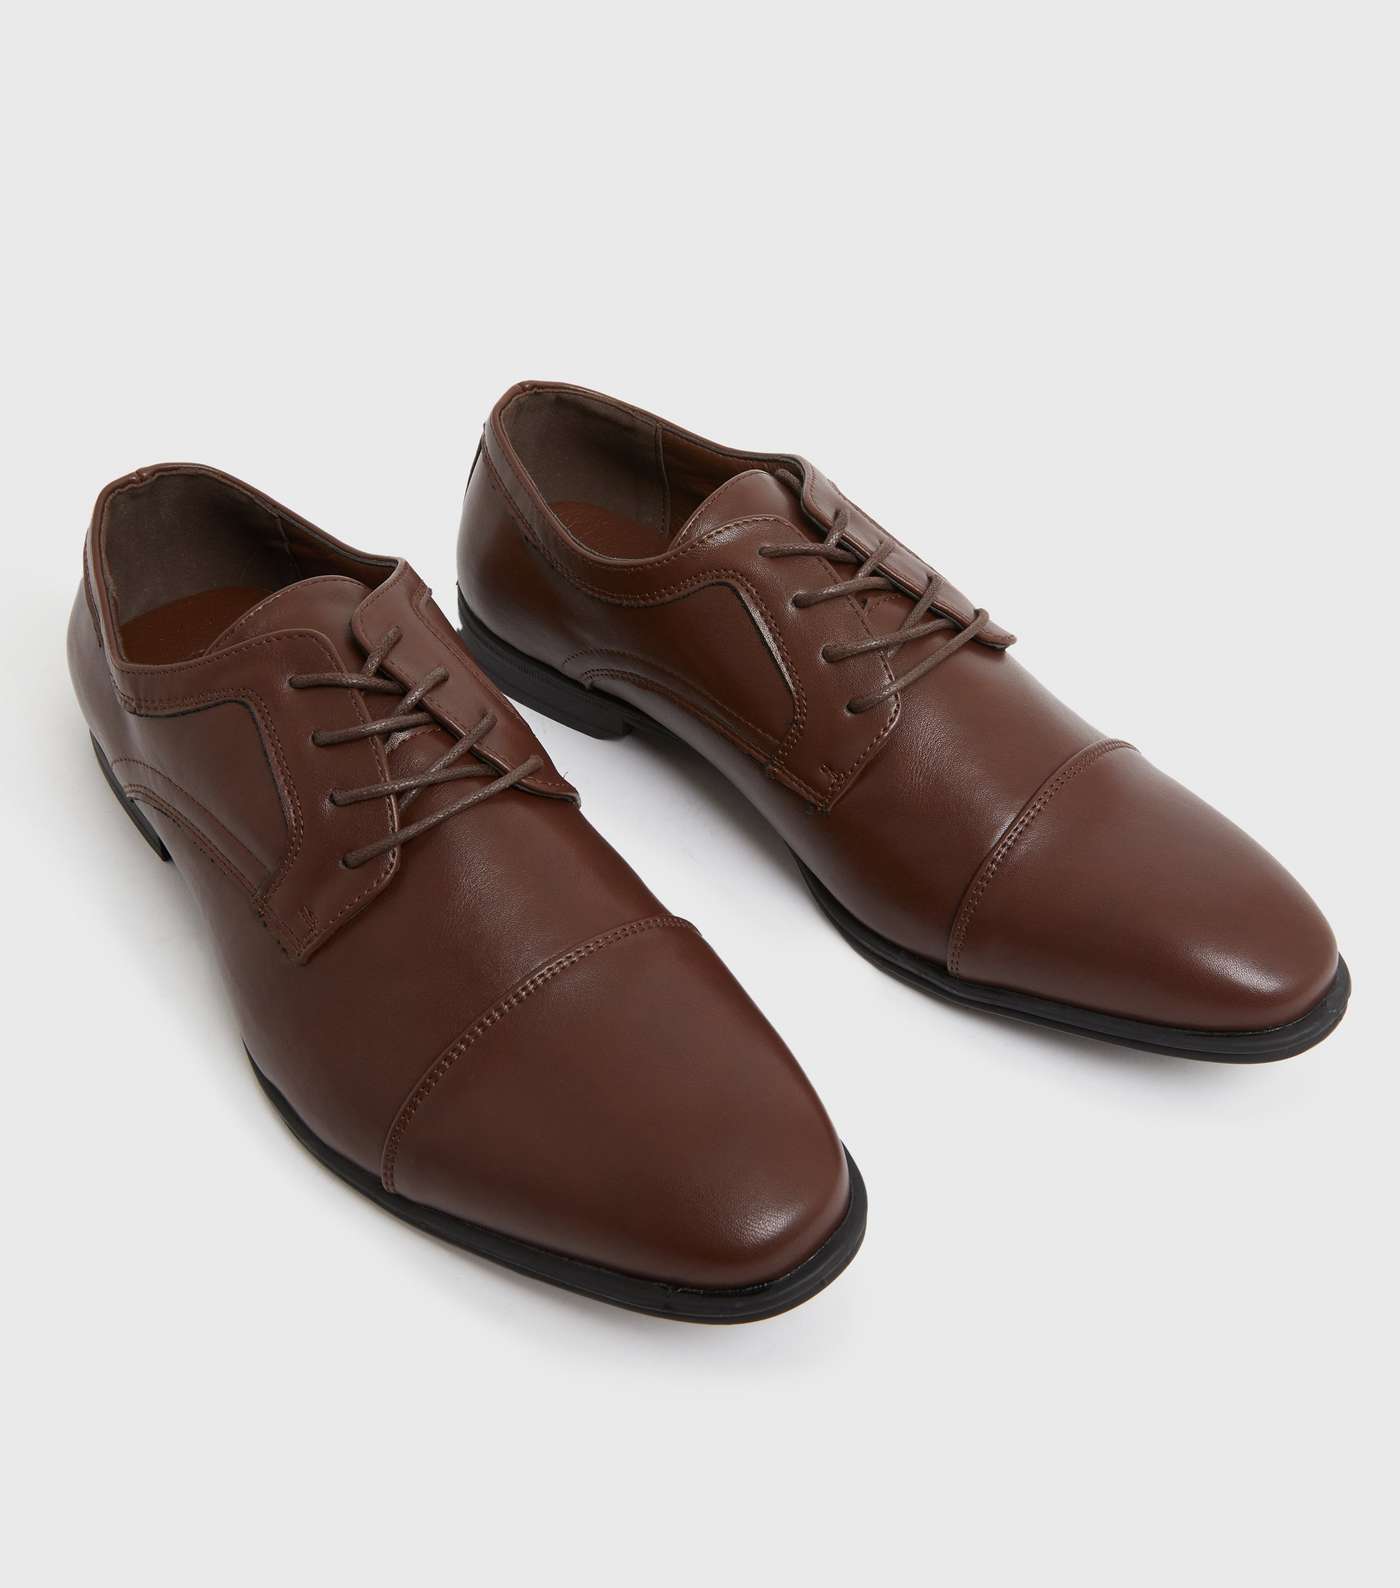 Dark Brown Leather-Look Oxford Shoes Image 3